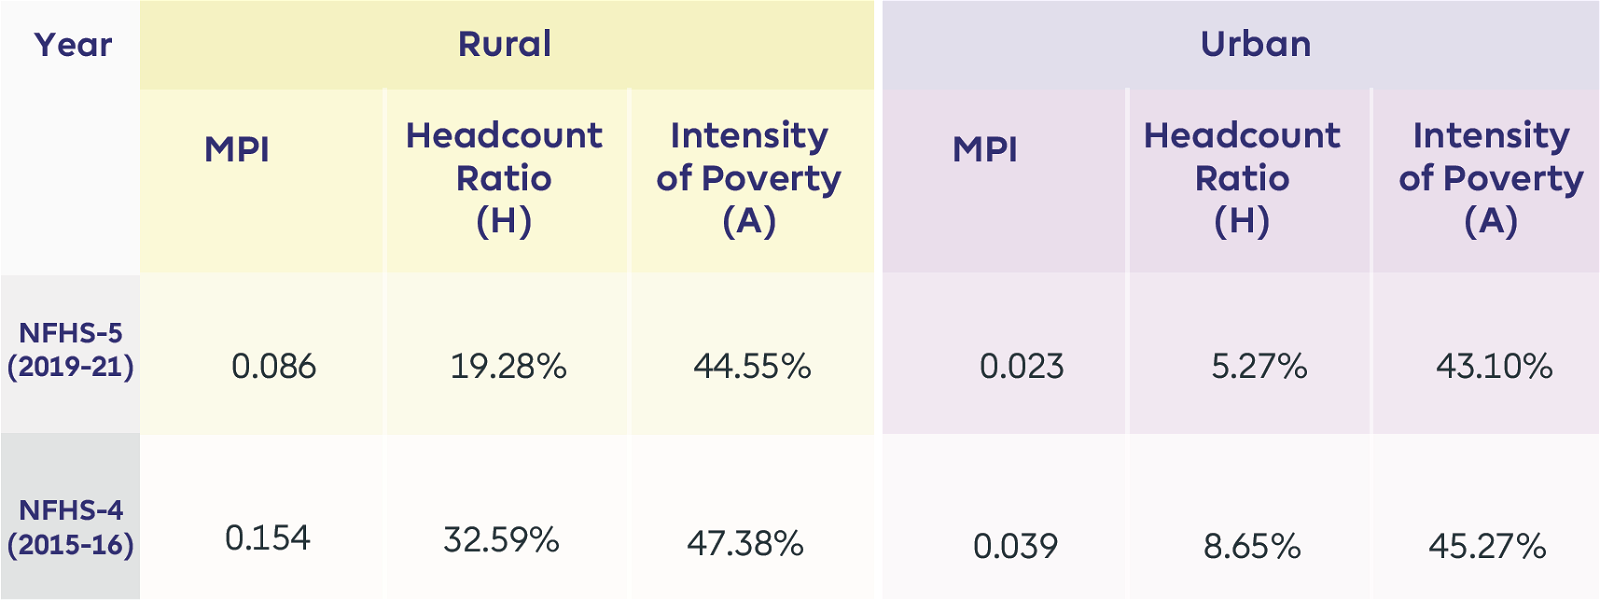 NFHS Survey about Multidimensional Poverty in India